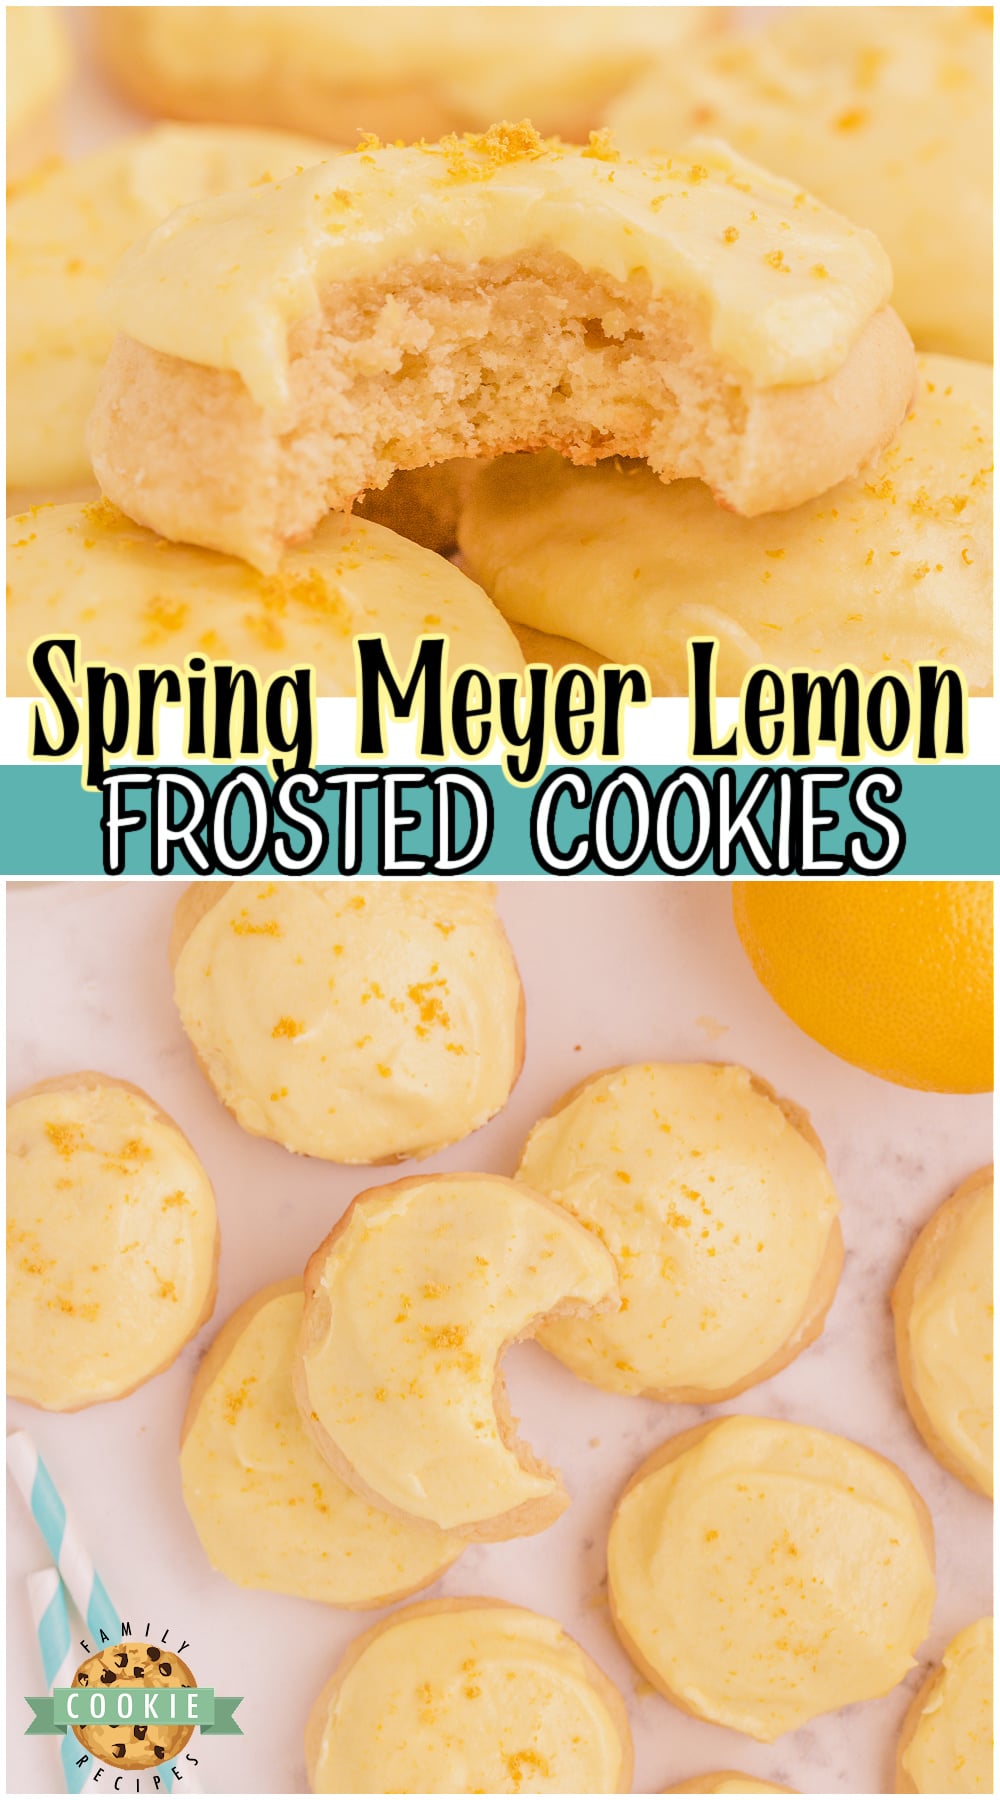 Meyer Lemon Cookies with delicious citrus flavor topped with a sweet, tangy frosting. Frosted lemon cookie recipe made with simple ingredients for a bright, fresh treat! via @buttergirls